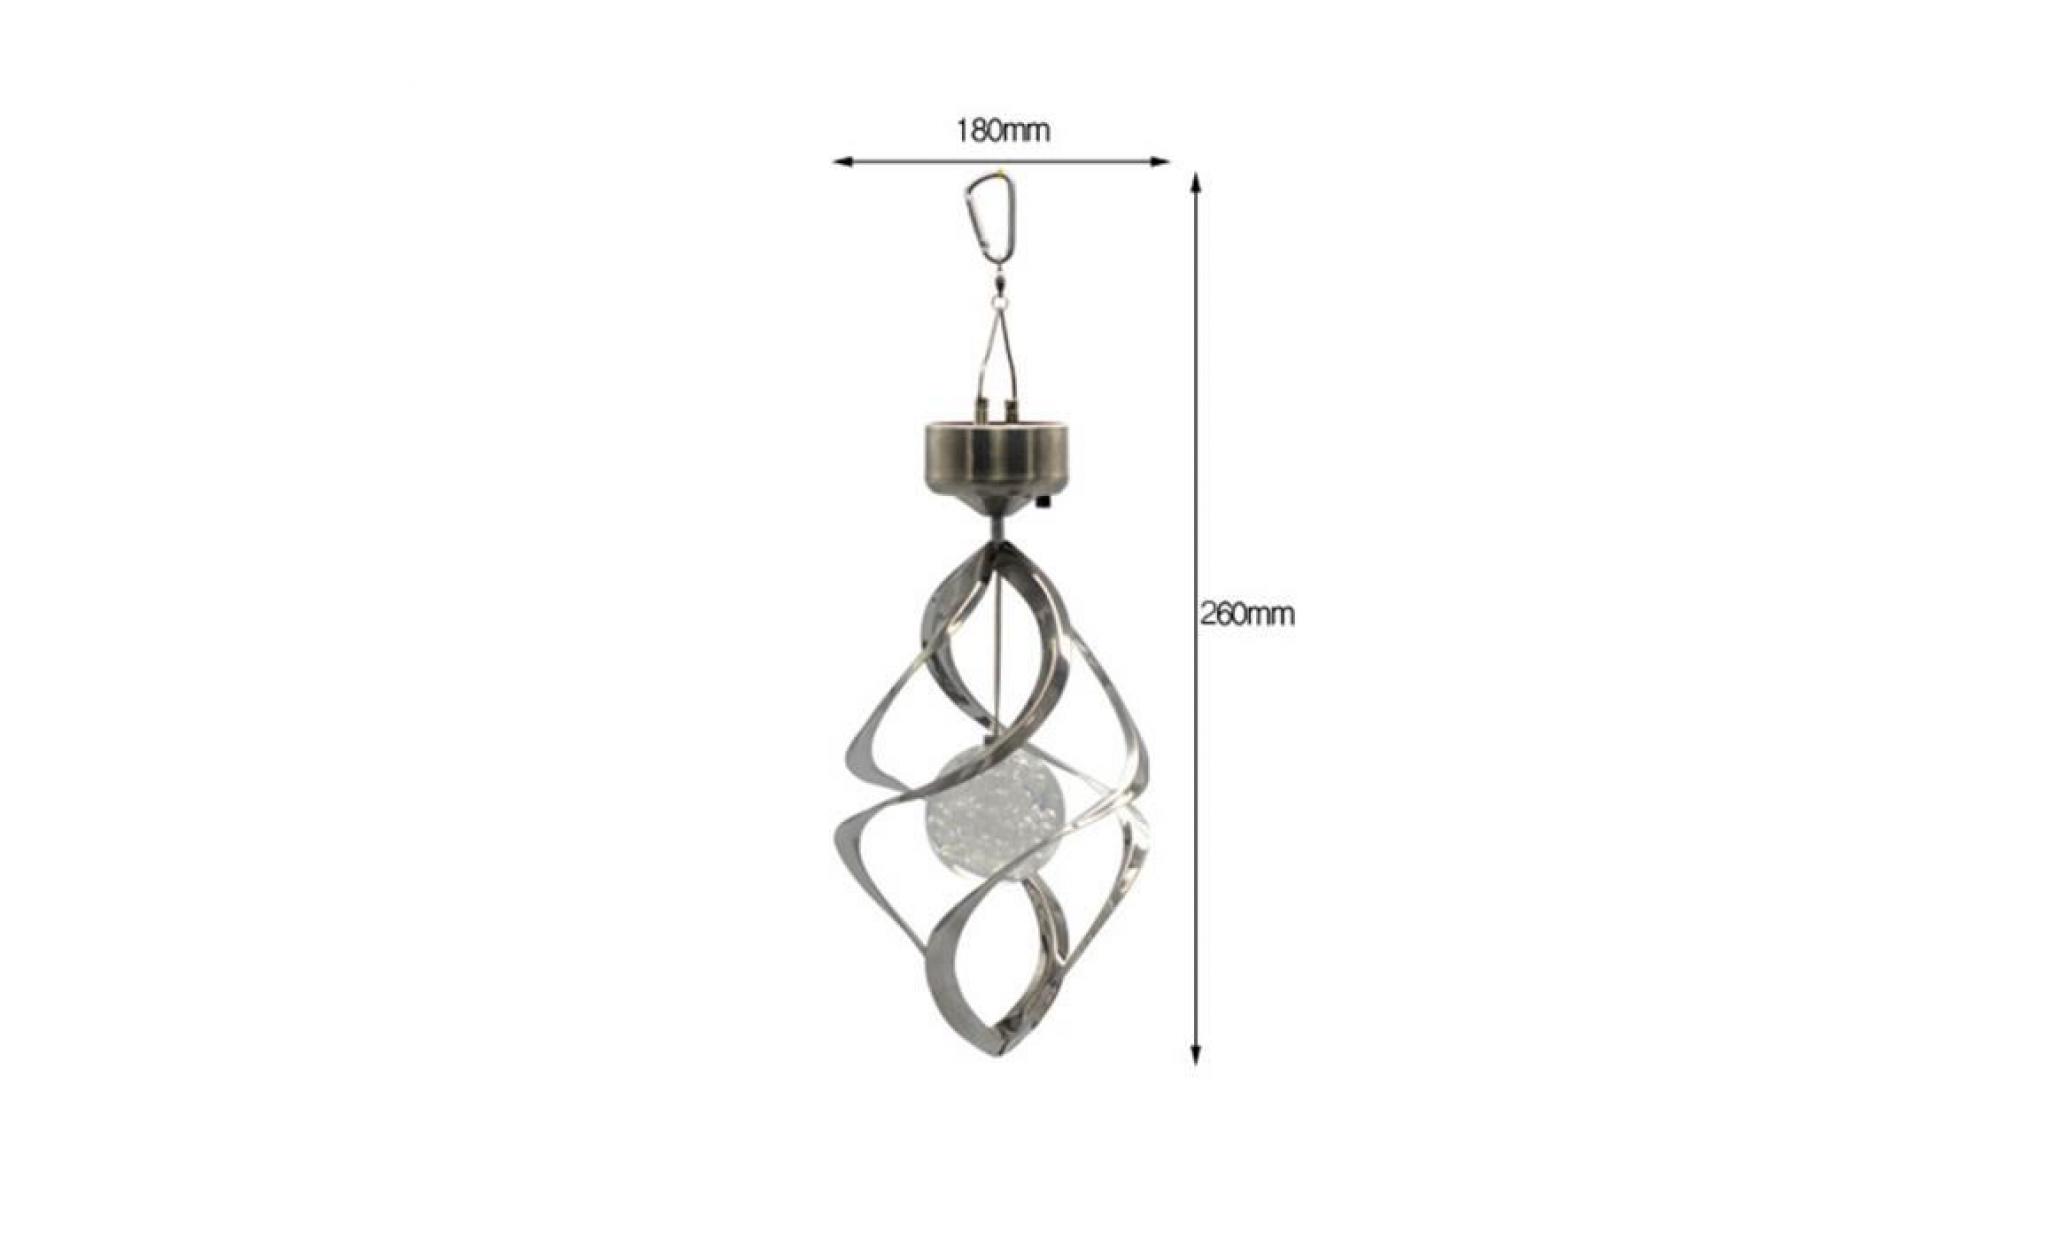 solar powered led wind chimes wind spinner outdoor hanging spiral garden light pas cher